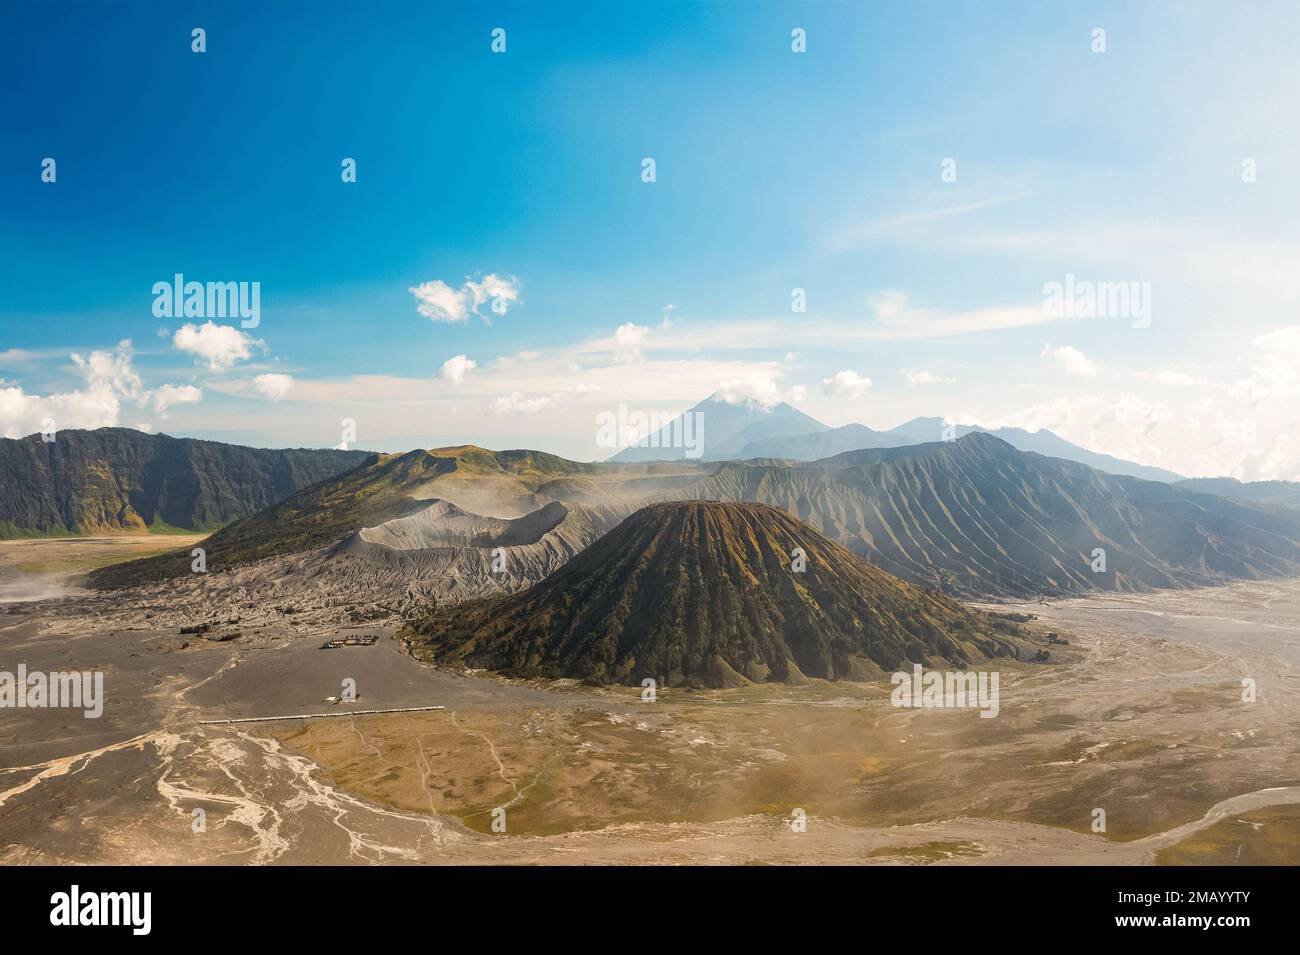 View from above, stunning panoramic view of the Mt Batok, Mt Bromo and the Mt Semeru in the distance during a sunny day. Stock Photo